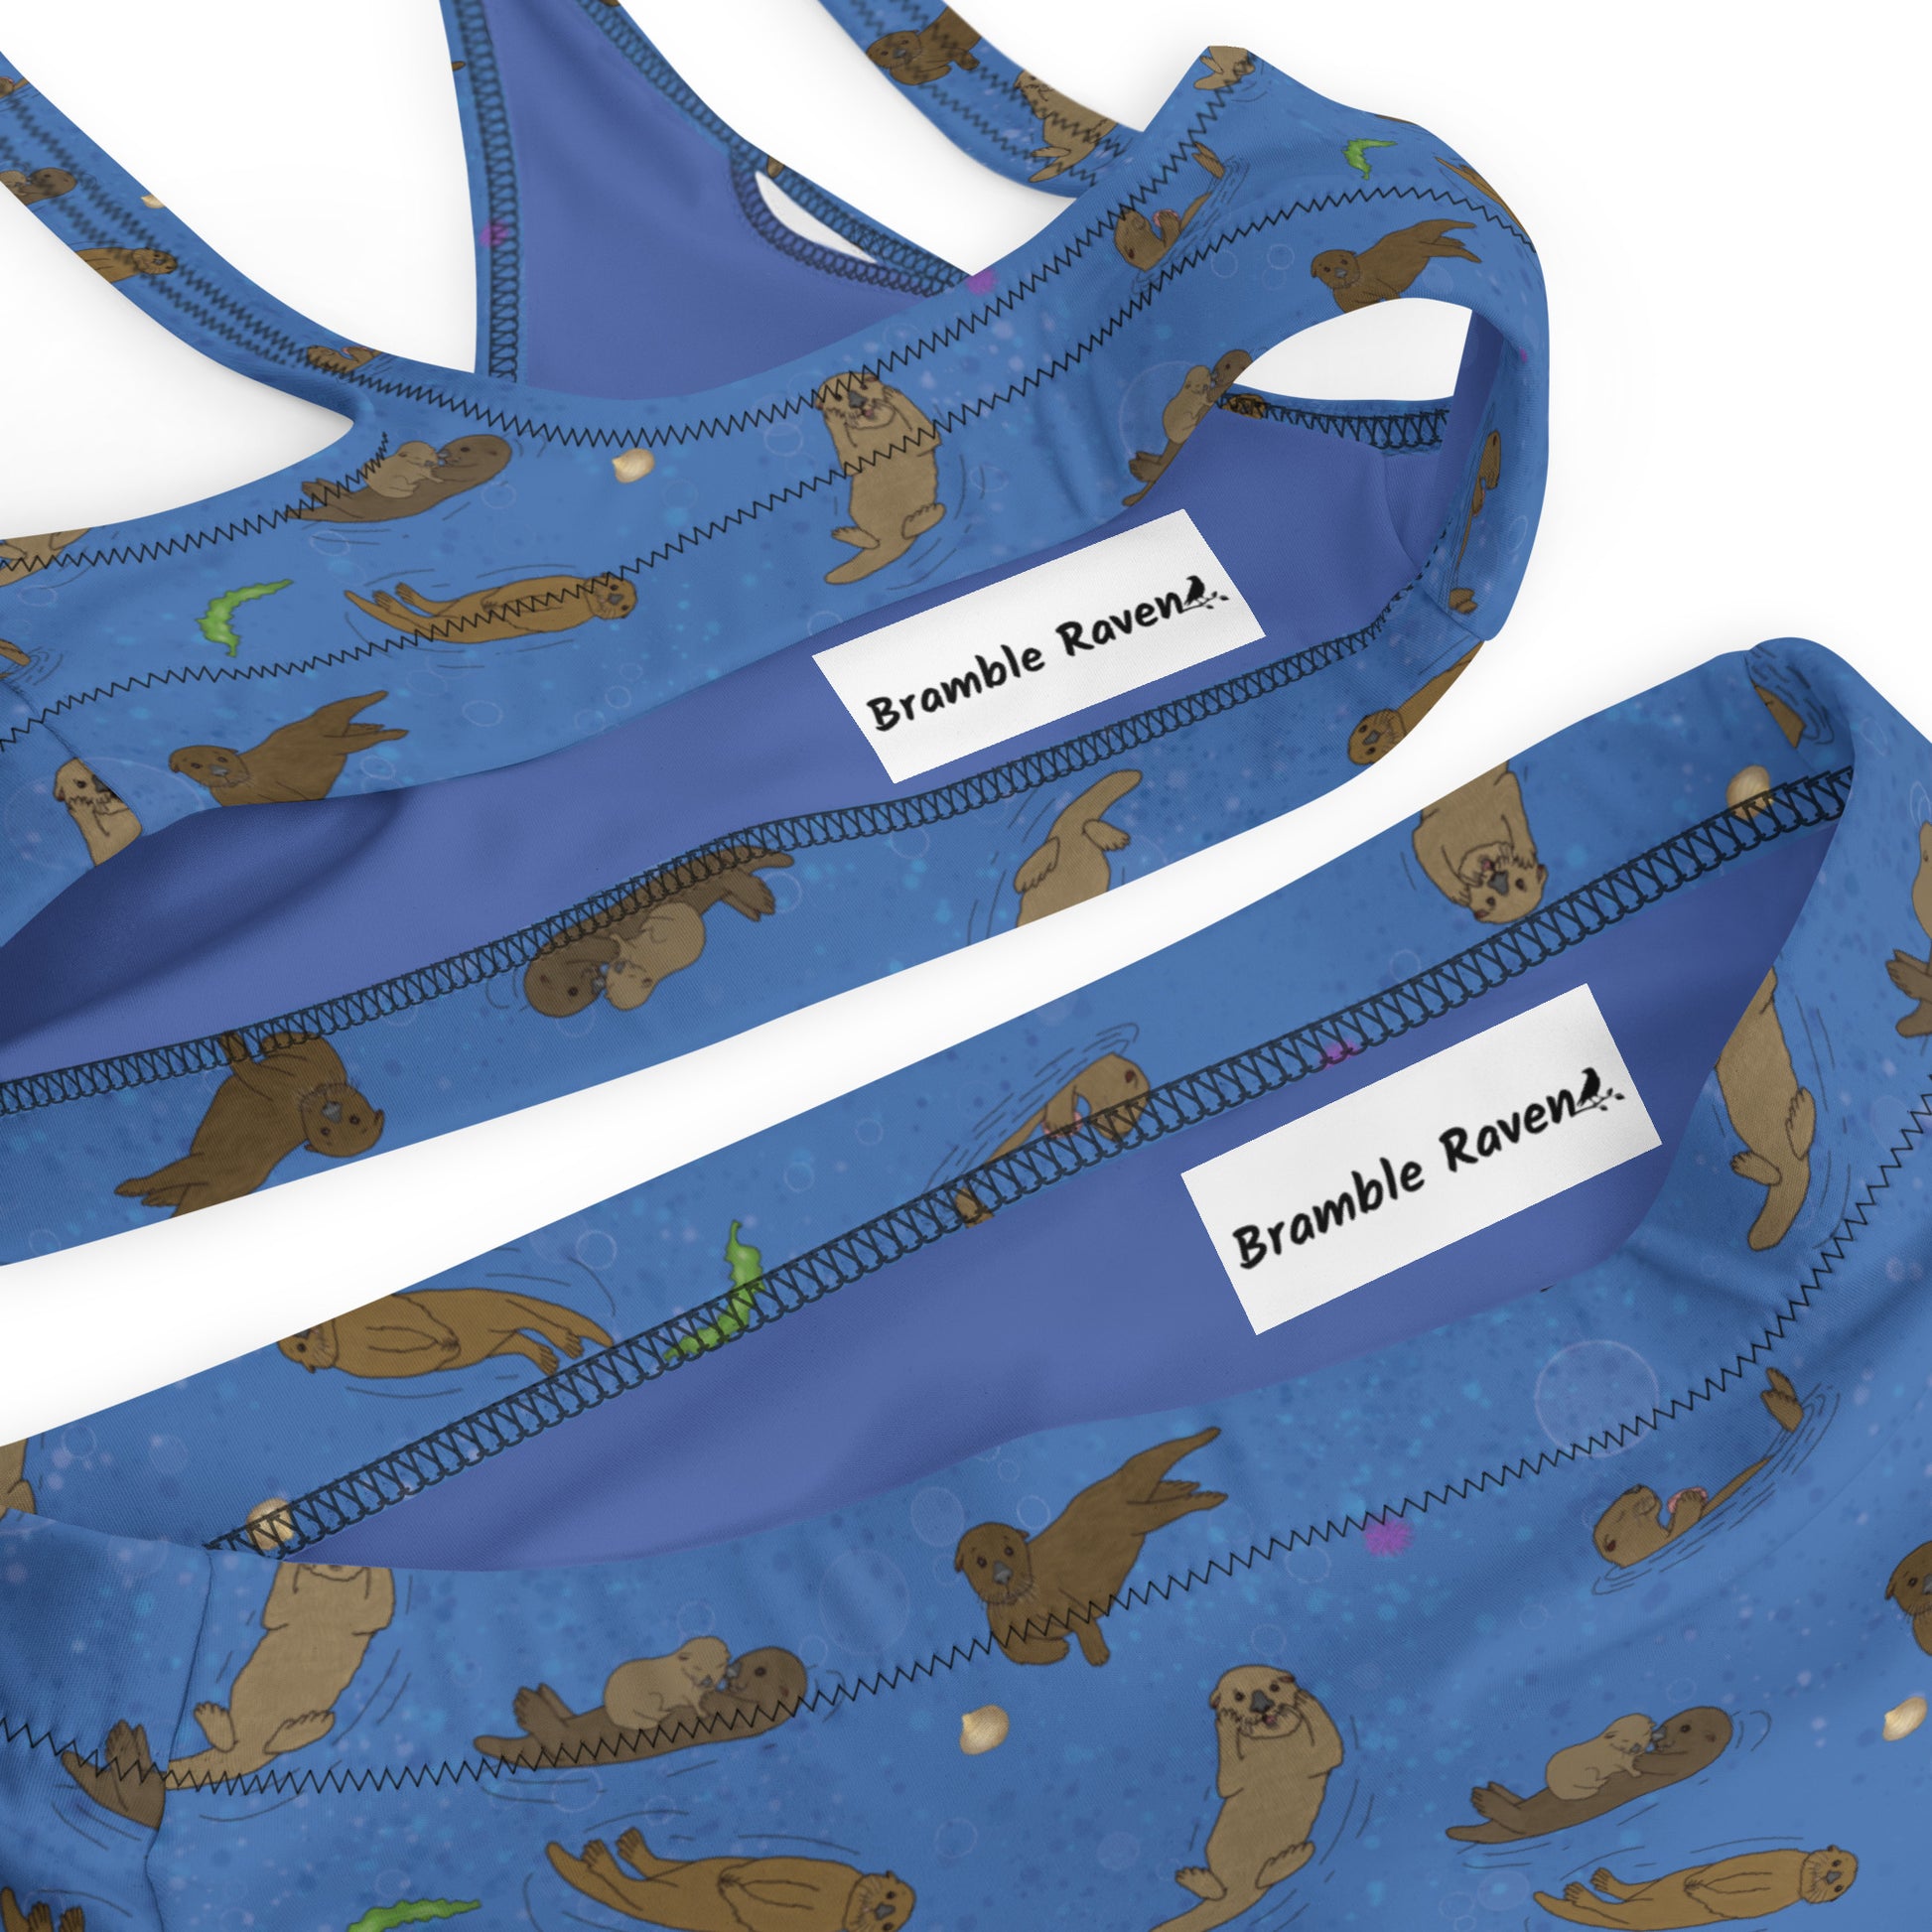 High-waisted bikini with hand-illustrated sea otters patterned on an ocean blue background. Made from recycled polyester combined with stretchable fabric. Has double layers and removable pads. Detail image of zigzag stitch and printed inner label with Bramble Raven logo.